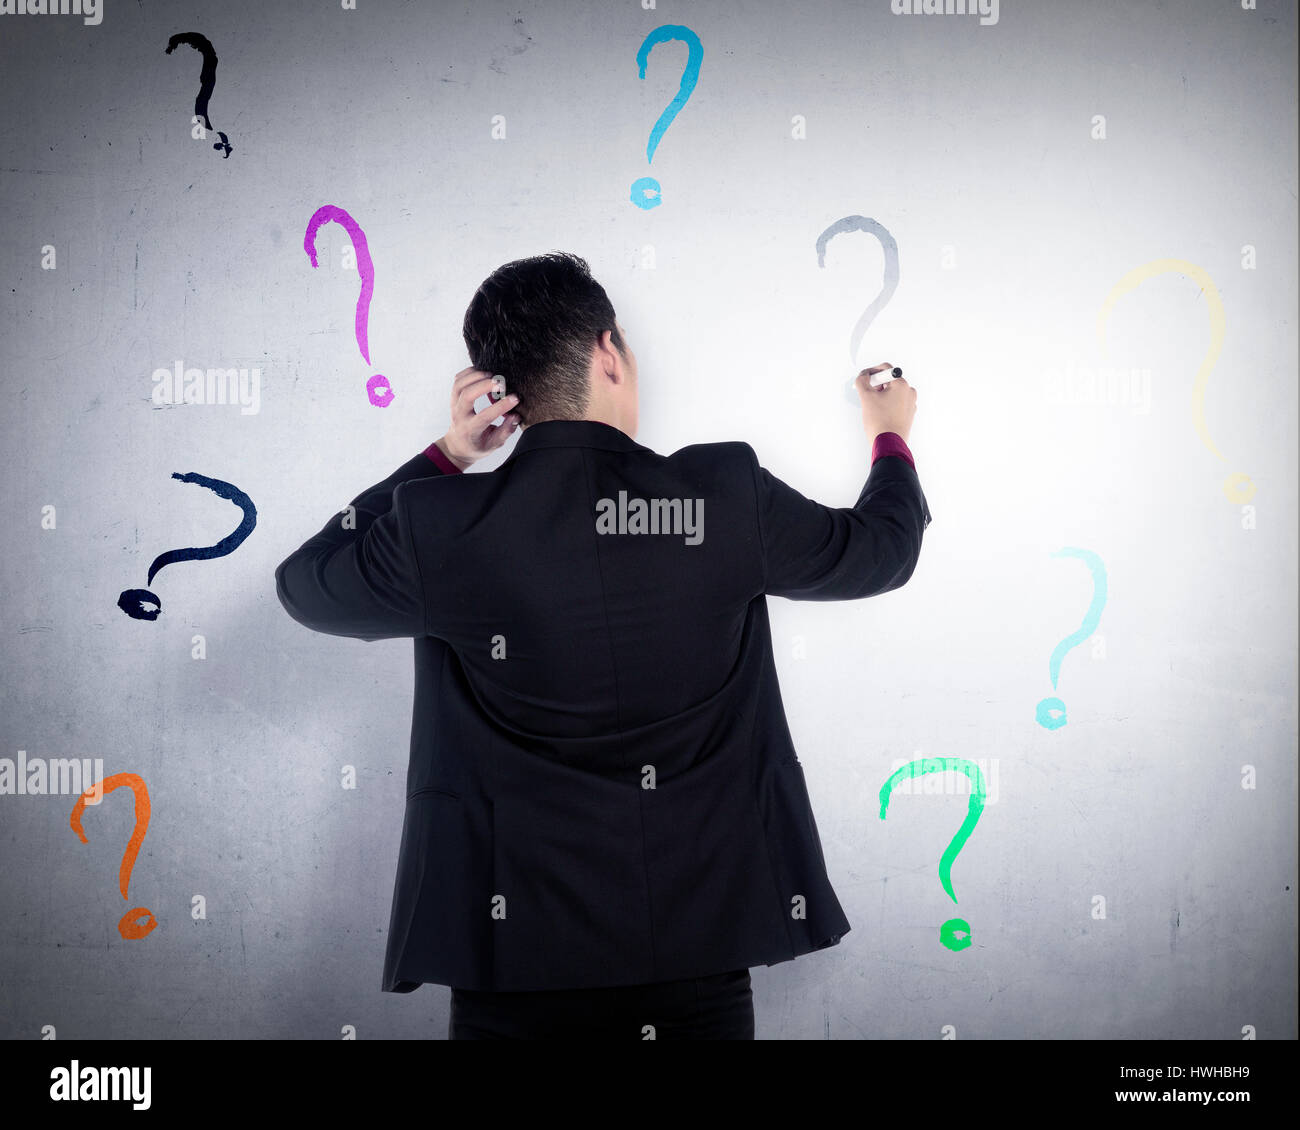 Business man write question mark on the wall. He dont know what to write Stock Photo